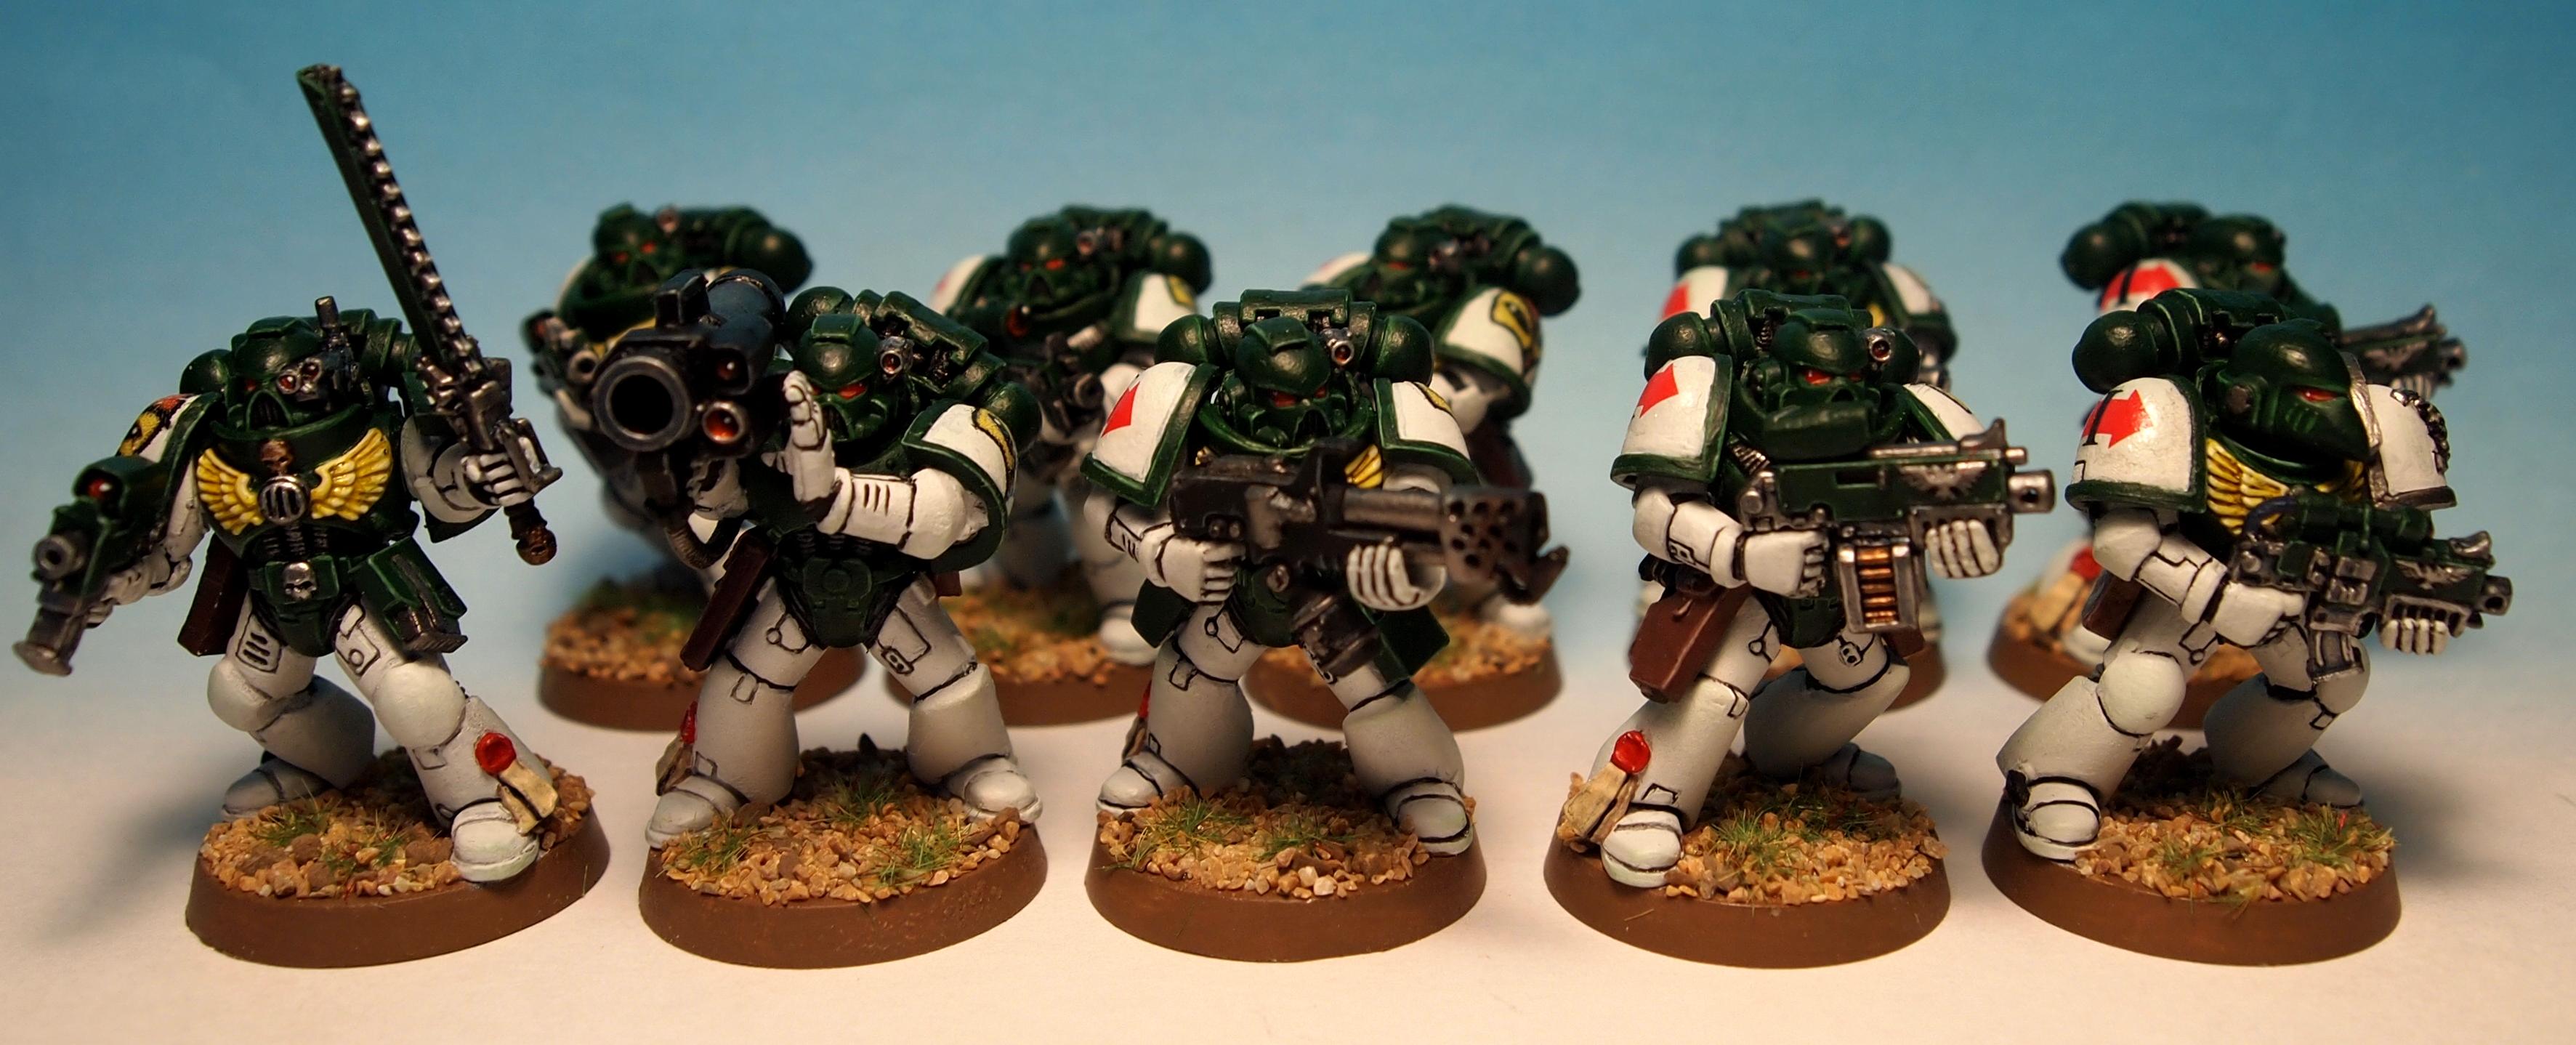 Mentor Legion, Space Marines, Tactical Squad, Warhammer 40,000